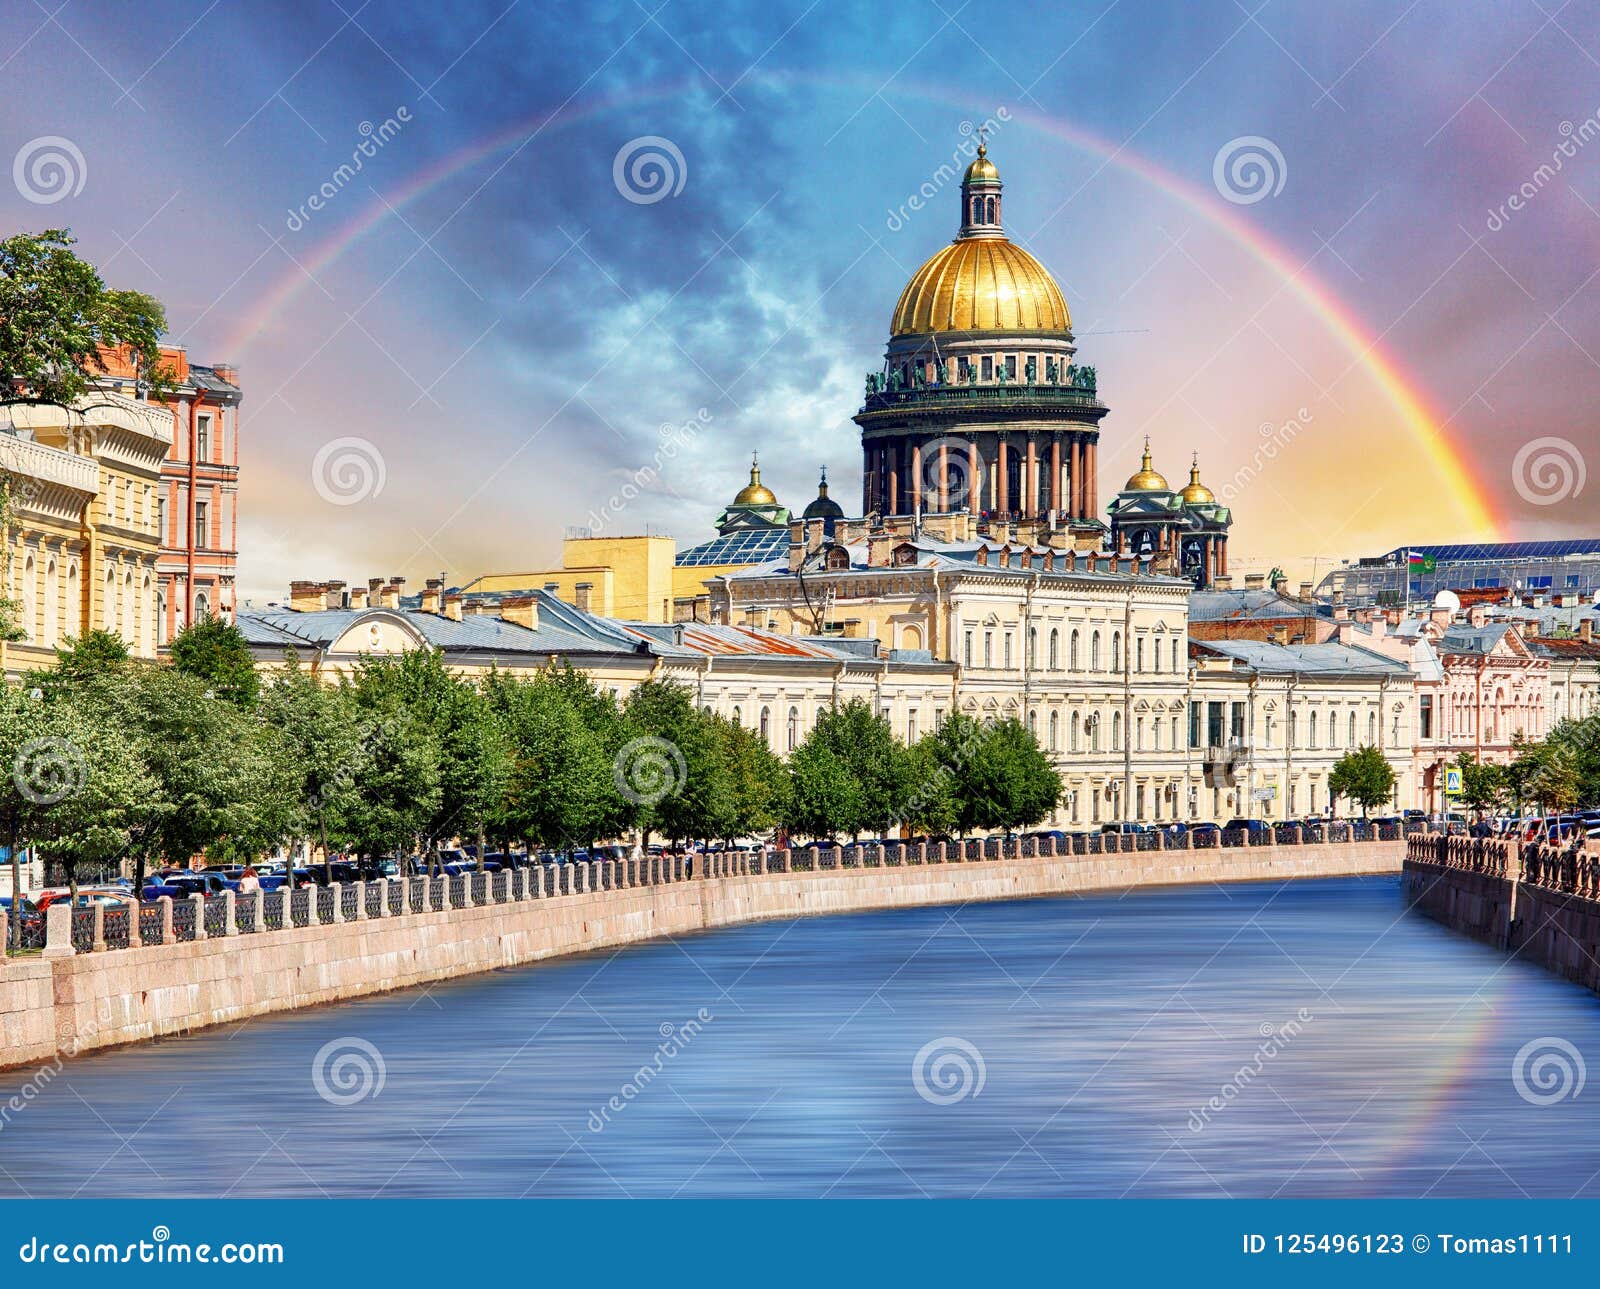 saint isaac cathedral across moyka river, st petersburg, russia